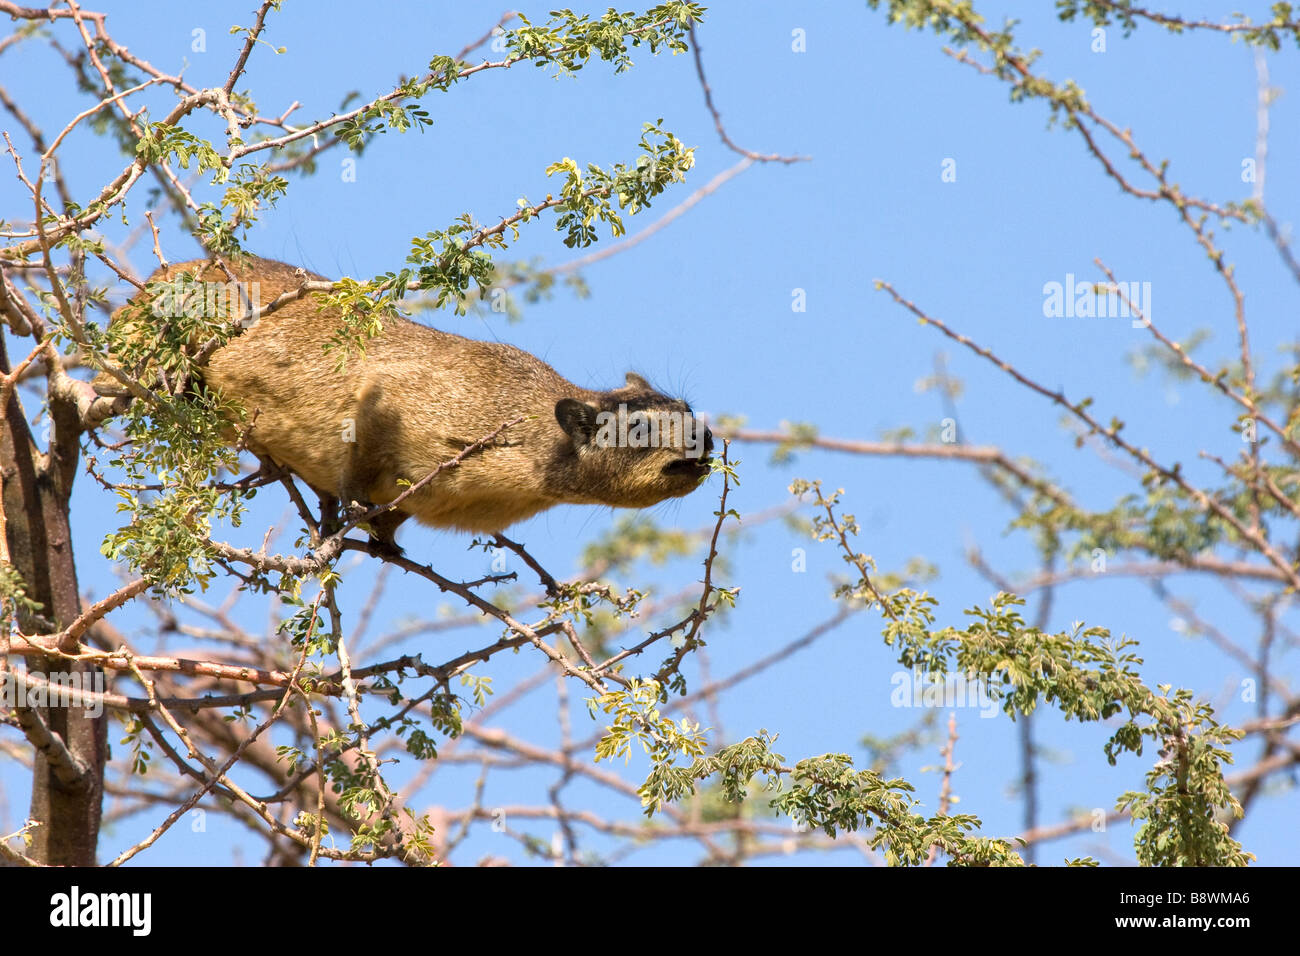 A Dassie or Rock Hyrax sits in the high branches of a tree and reaches out to get to the best leaves to eat in Souh Africa Stock Photo